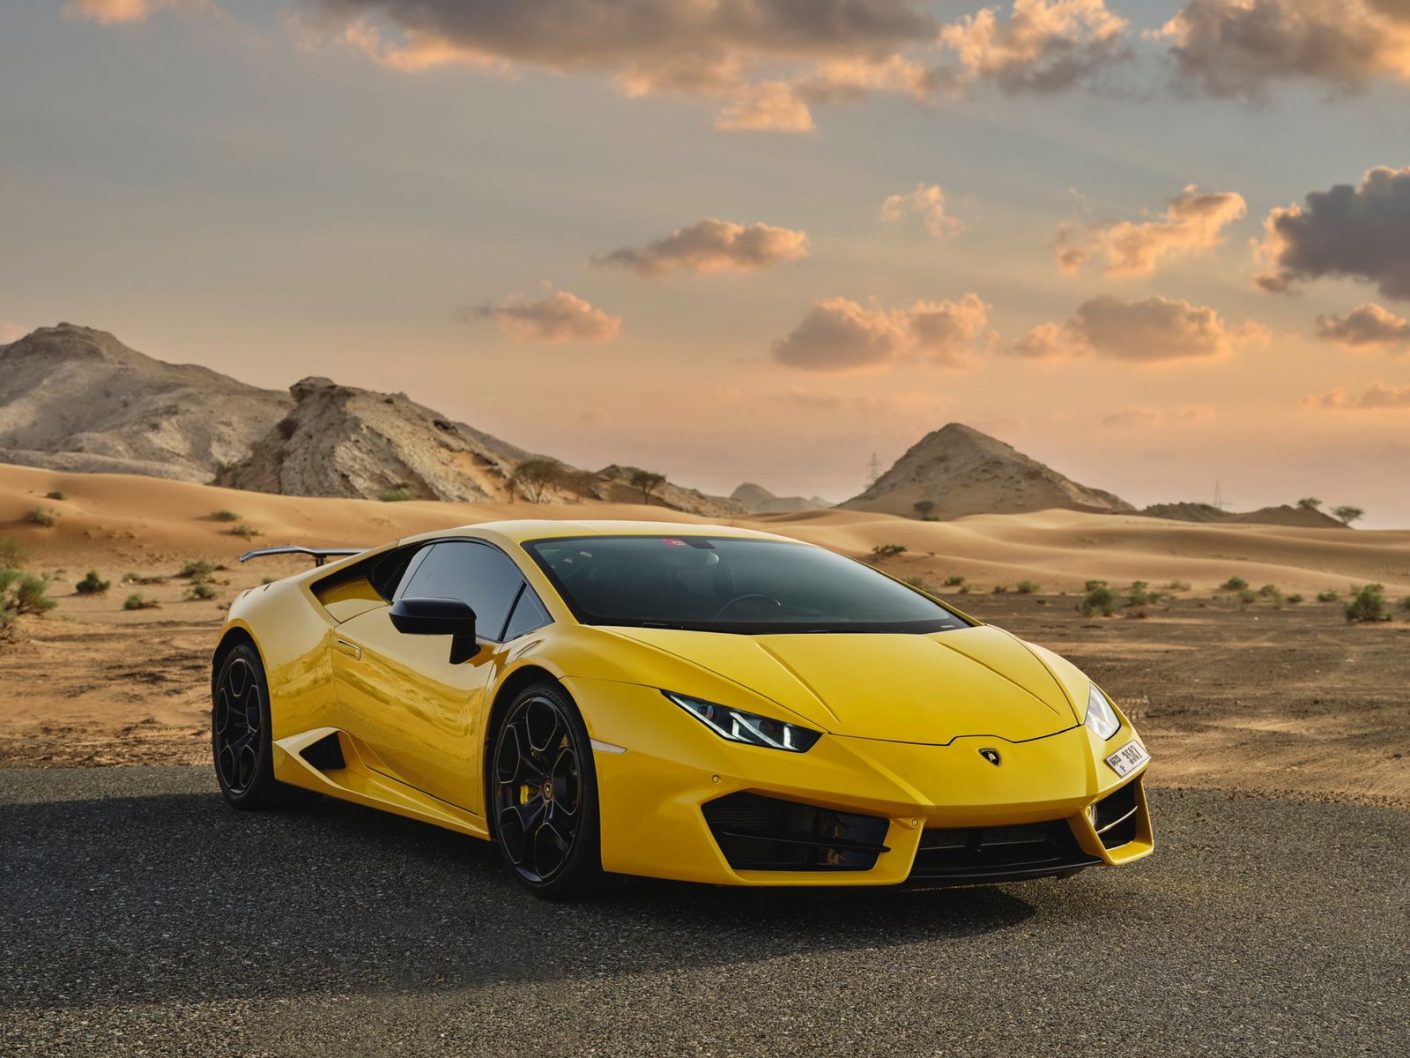 Mastering The Road: Driving In Style With Luxury Car Rentals